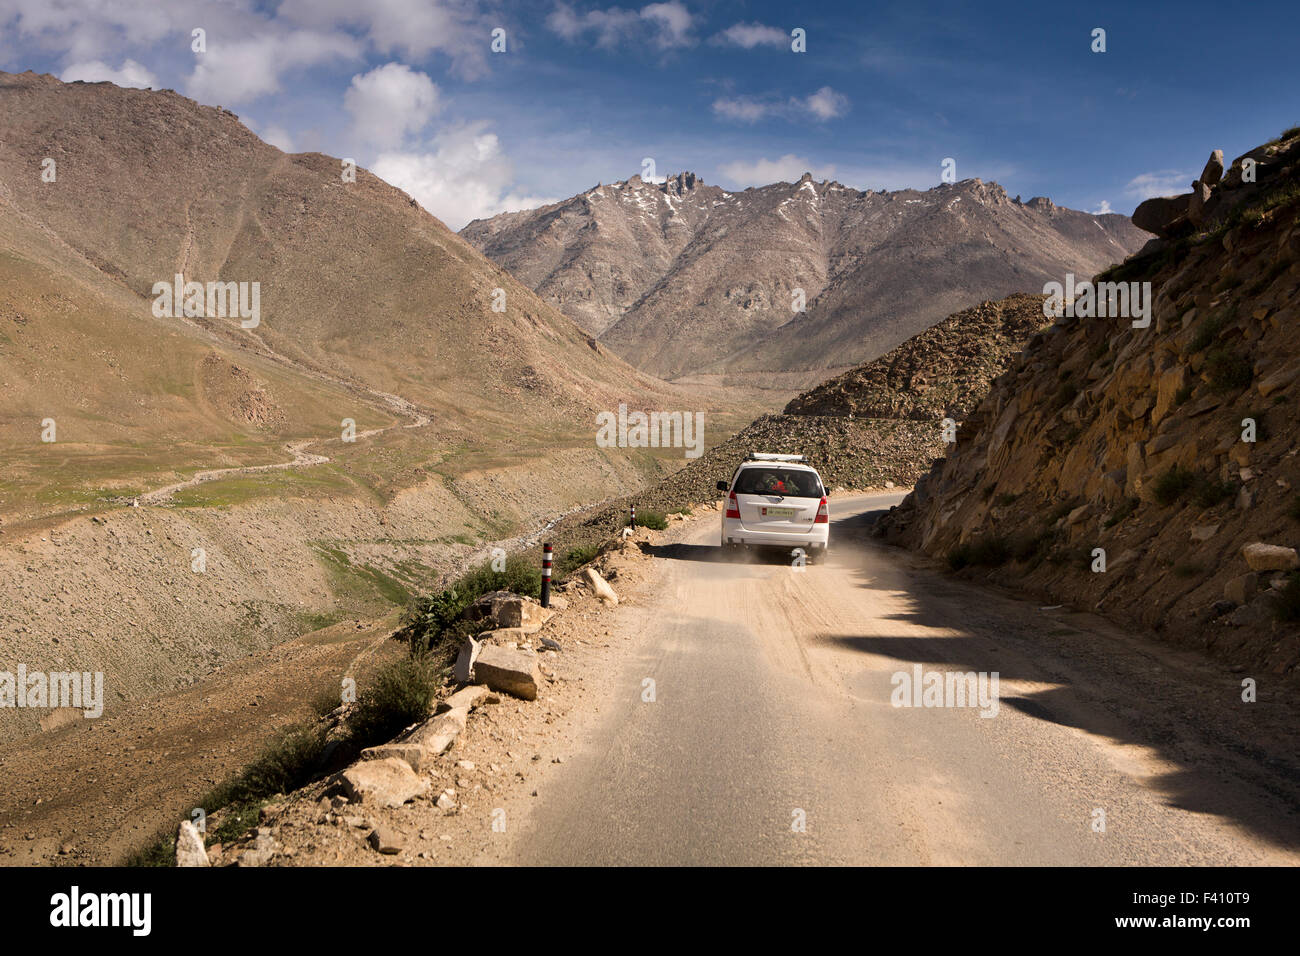 India, Jammu & Kashmir, Ladakh, Leh, car driving on metalled section of route to Khardung La, the world’s highest motorable road Stock Photo